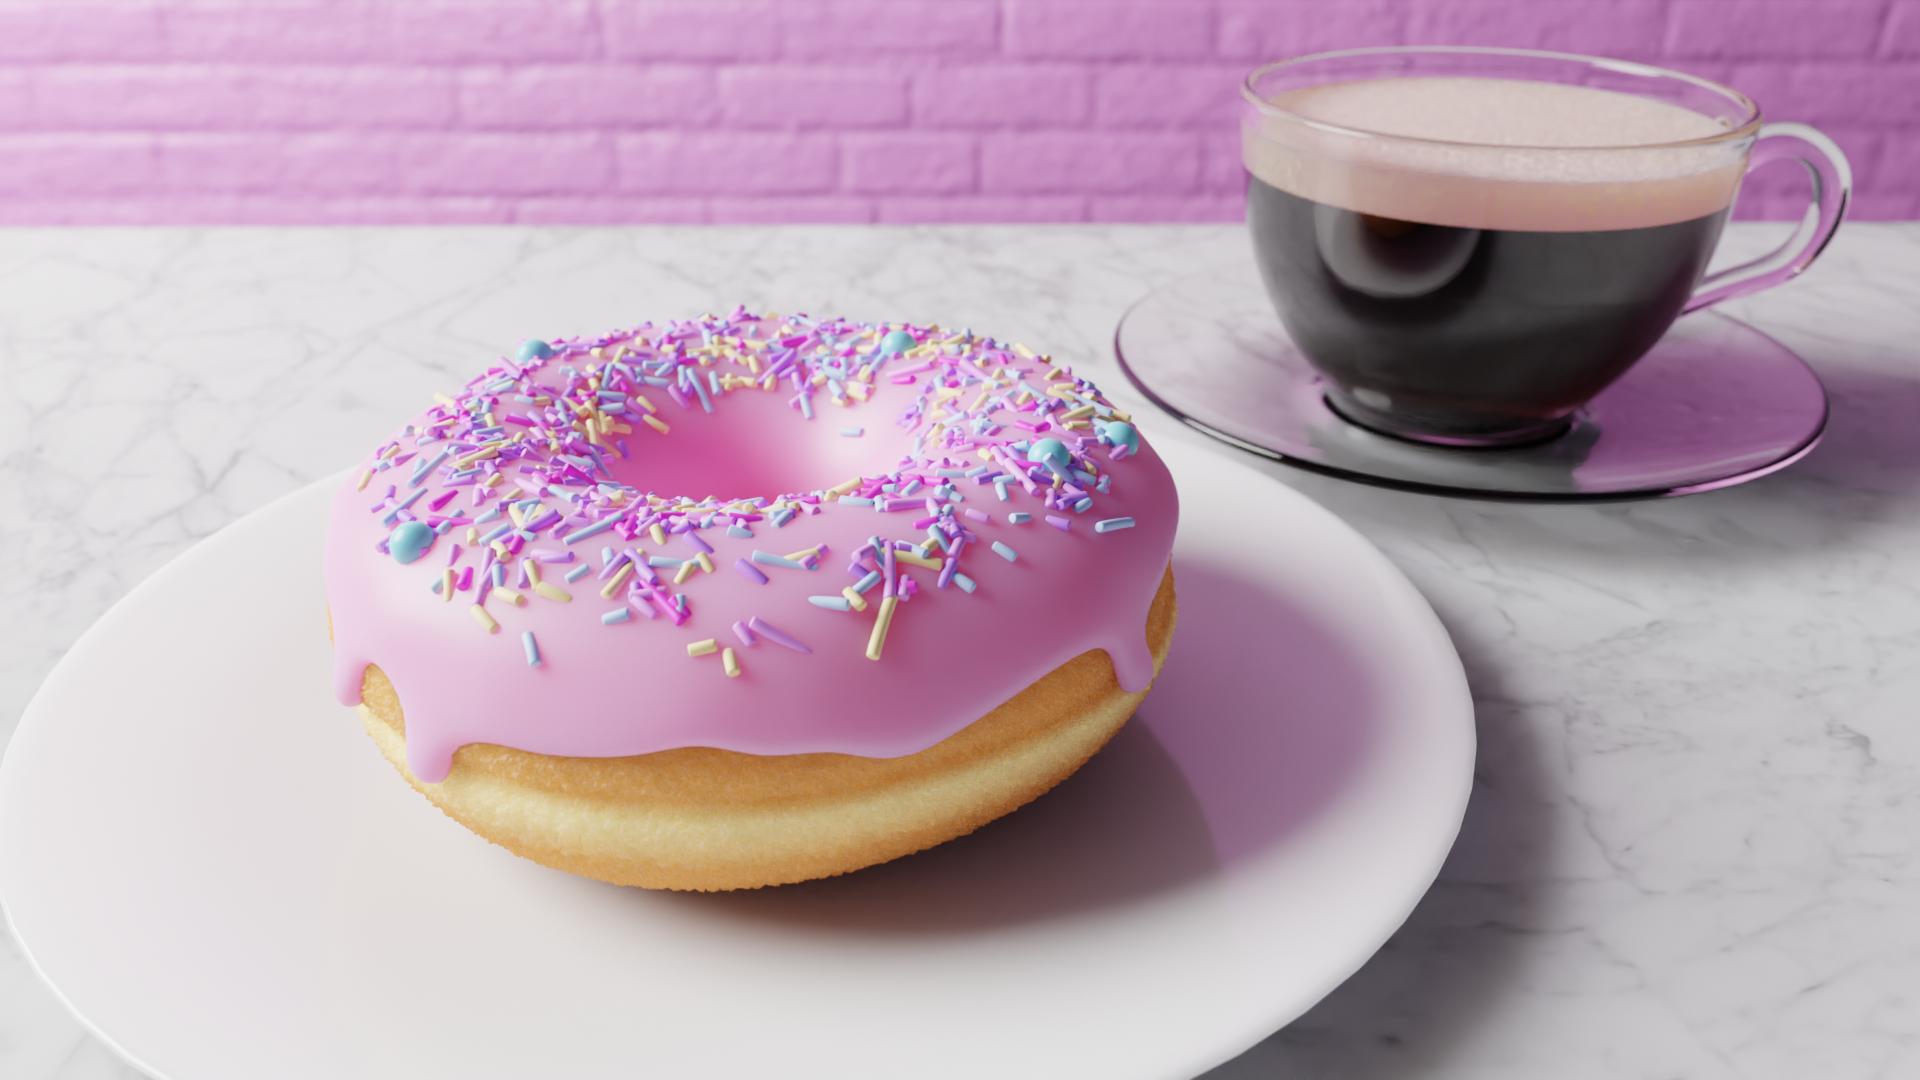 Andrew Price on Twitter: new Blender Beginner Donut tutorial series has started! https://t.co/7wN5wiEeJT New episodes launch every other day #b3d https://t.co/vI1BqNNw5v" / Twitter